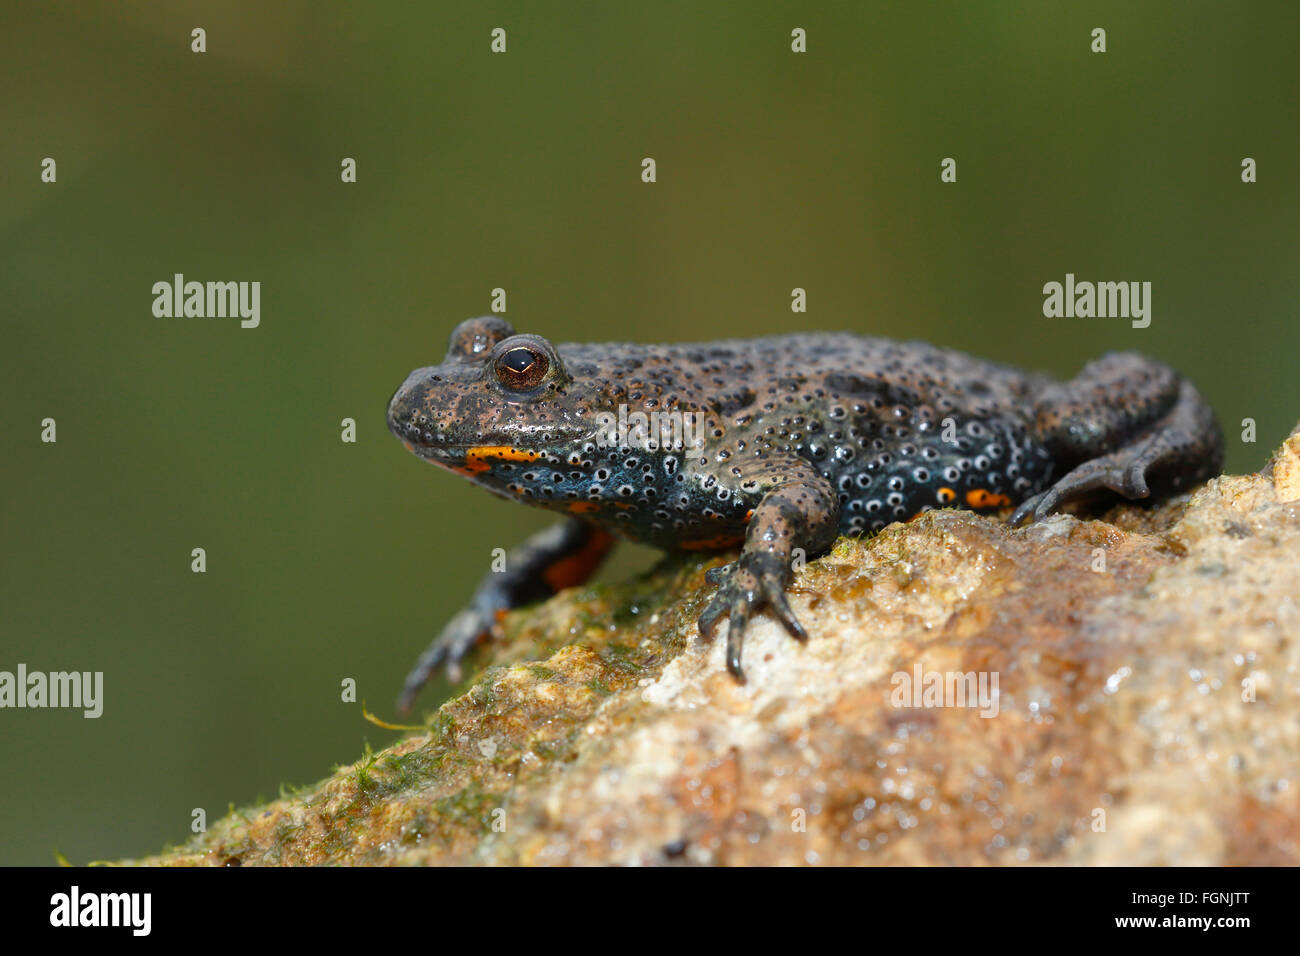 European fire-bellied toad (Bombina bombina), toad, le lac Balaton, Hongrie Banque D'Images